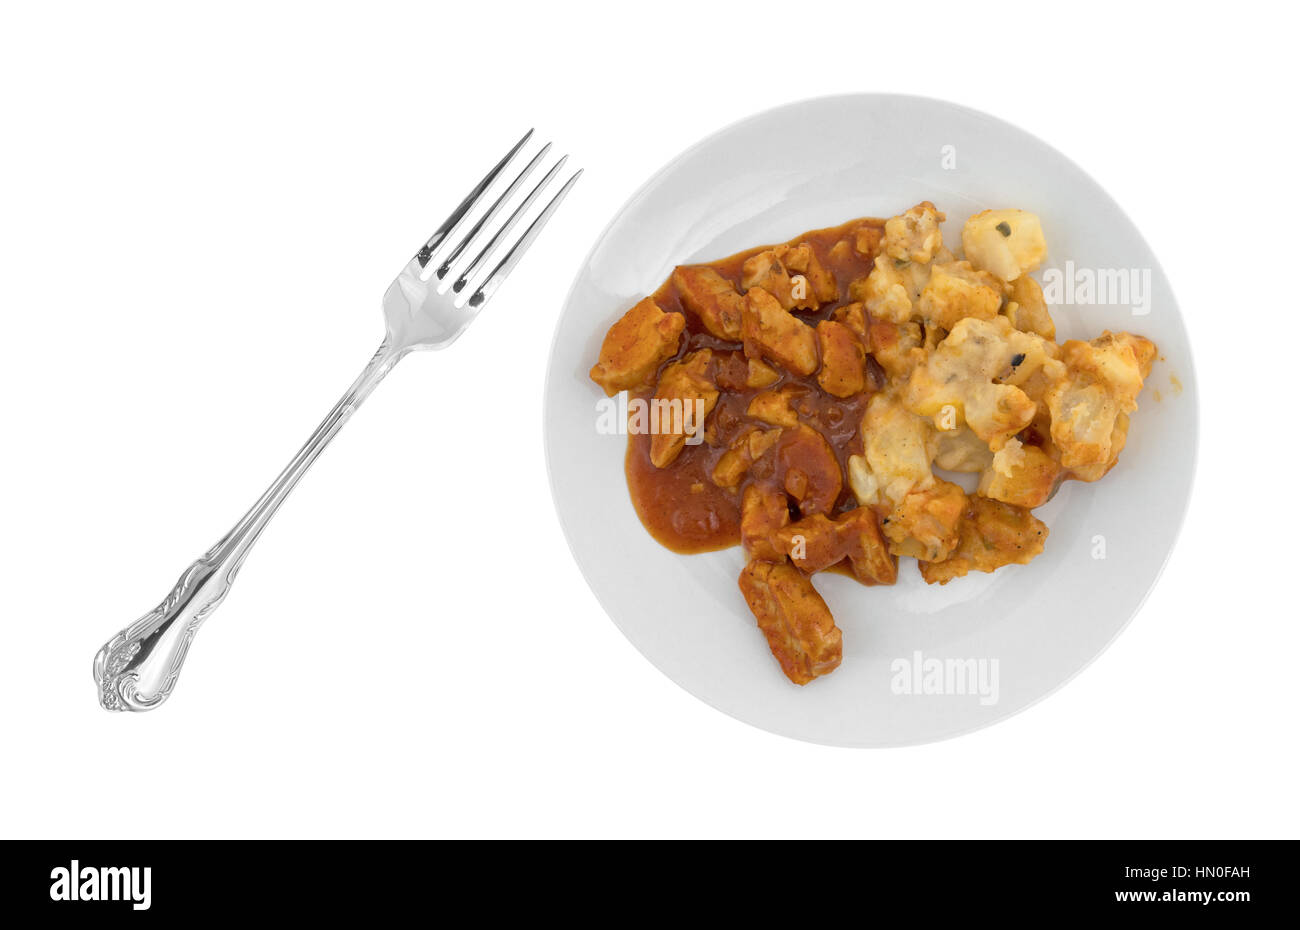 A plate with chunks of chicken in a thick barbecue sauce plus cheese covered potatoes plus a fork to the side isolated on a white background. Stock Photo